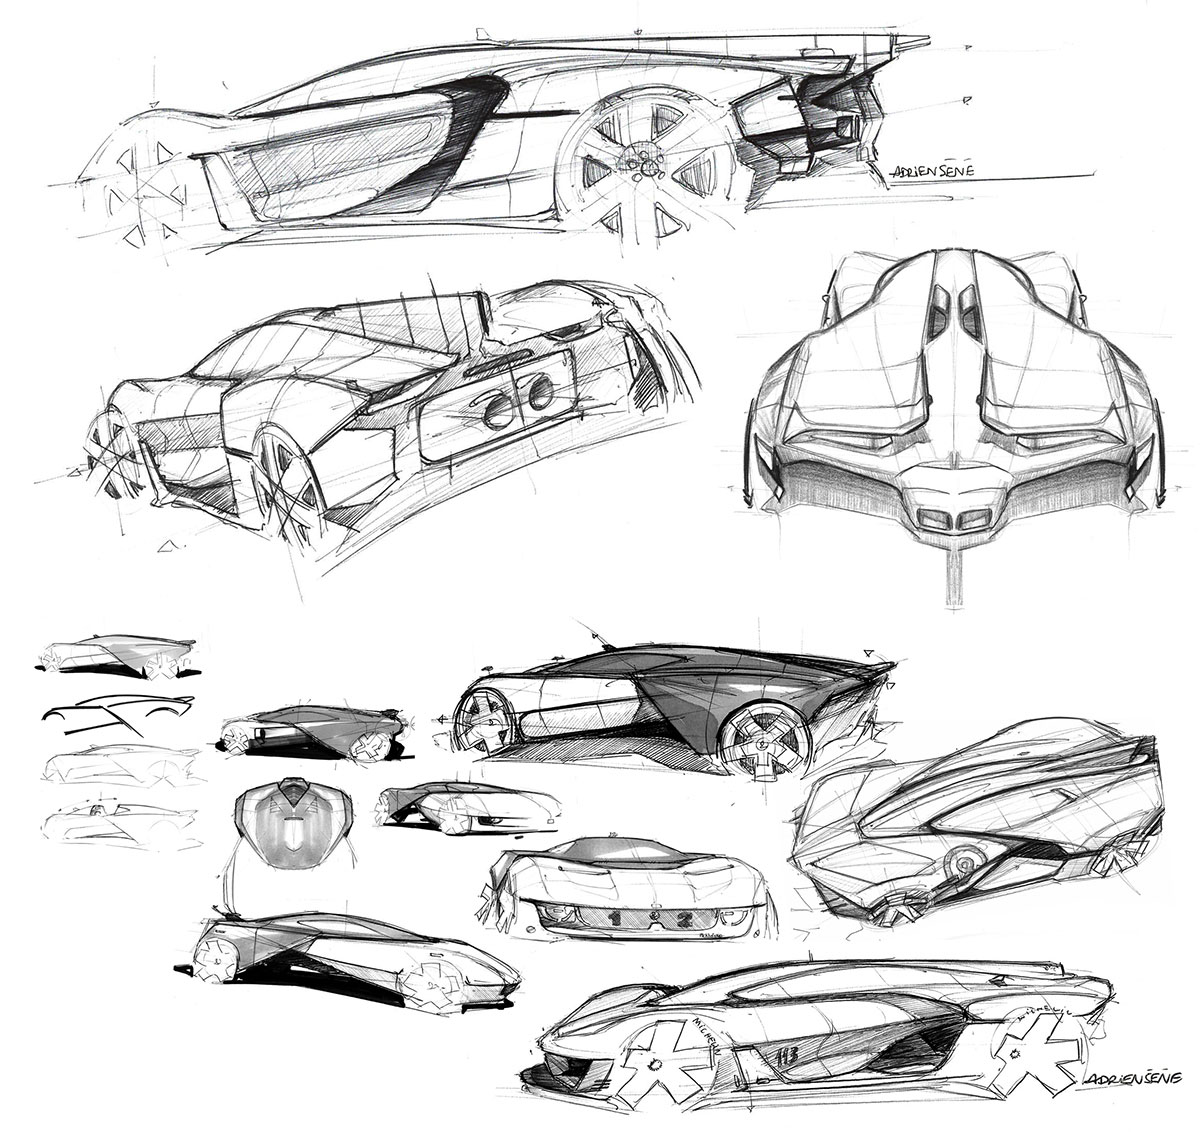 Bell & Ross AeroGT Concept (2016) - Design Sketches by Andriene Sene